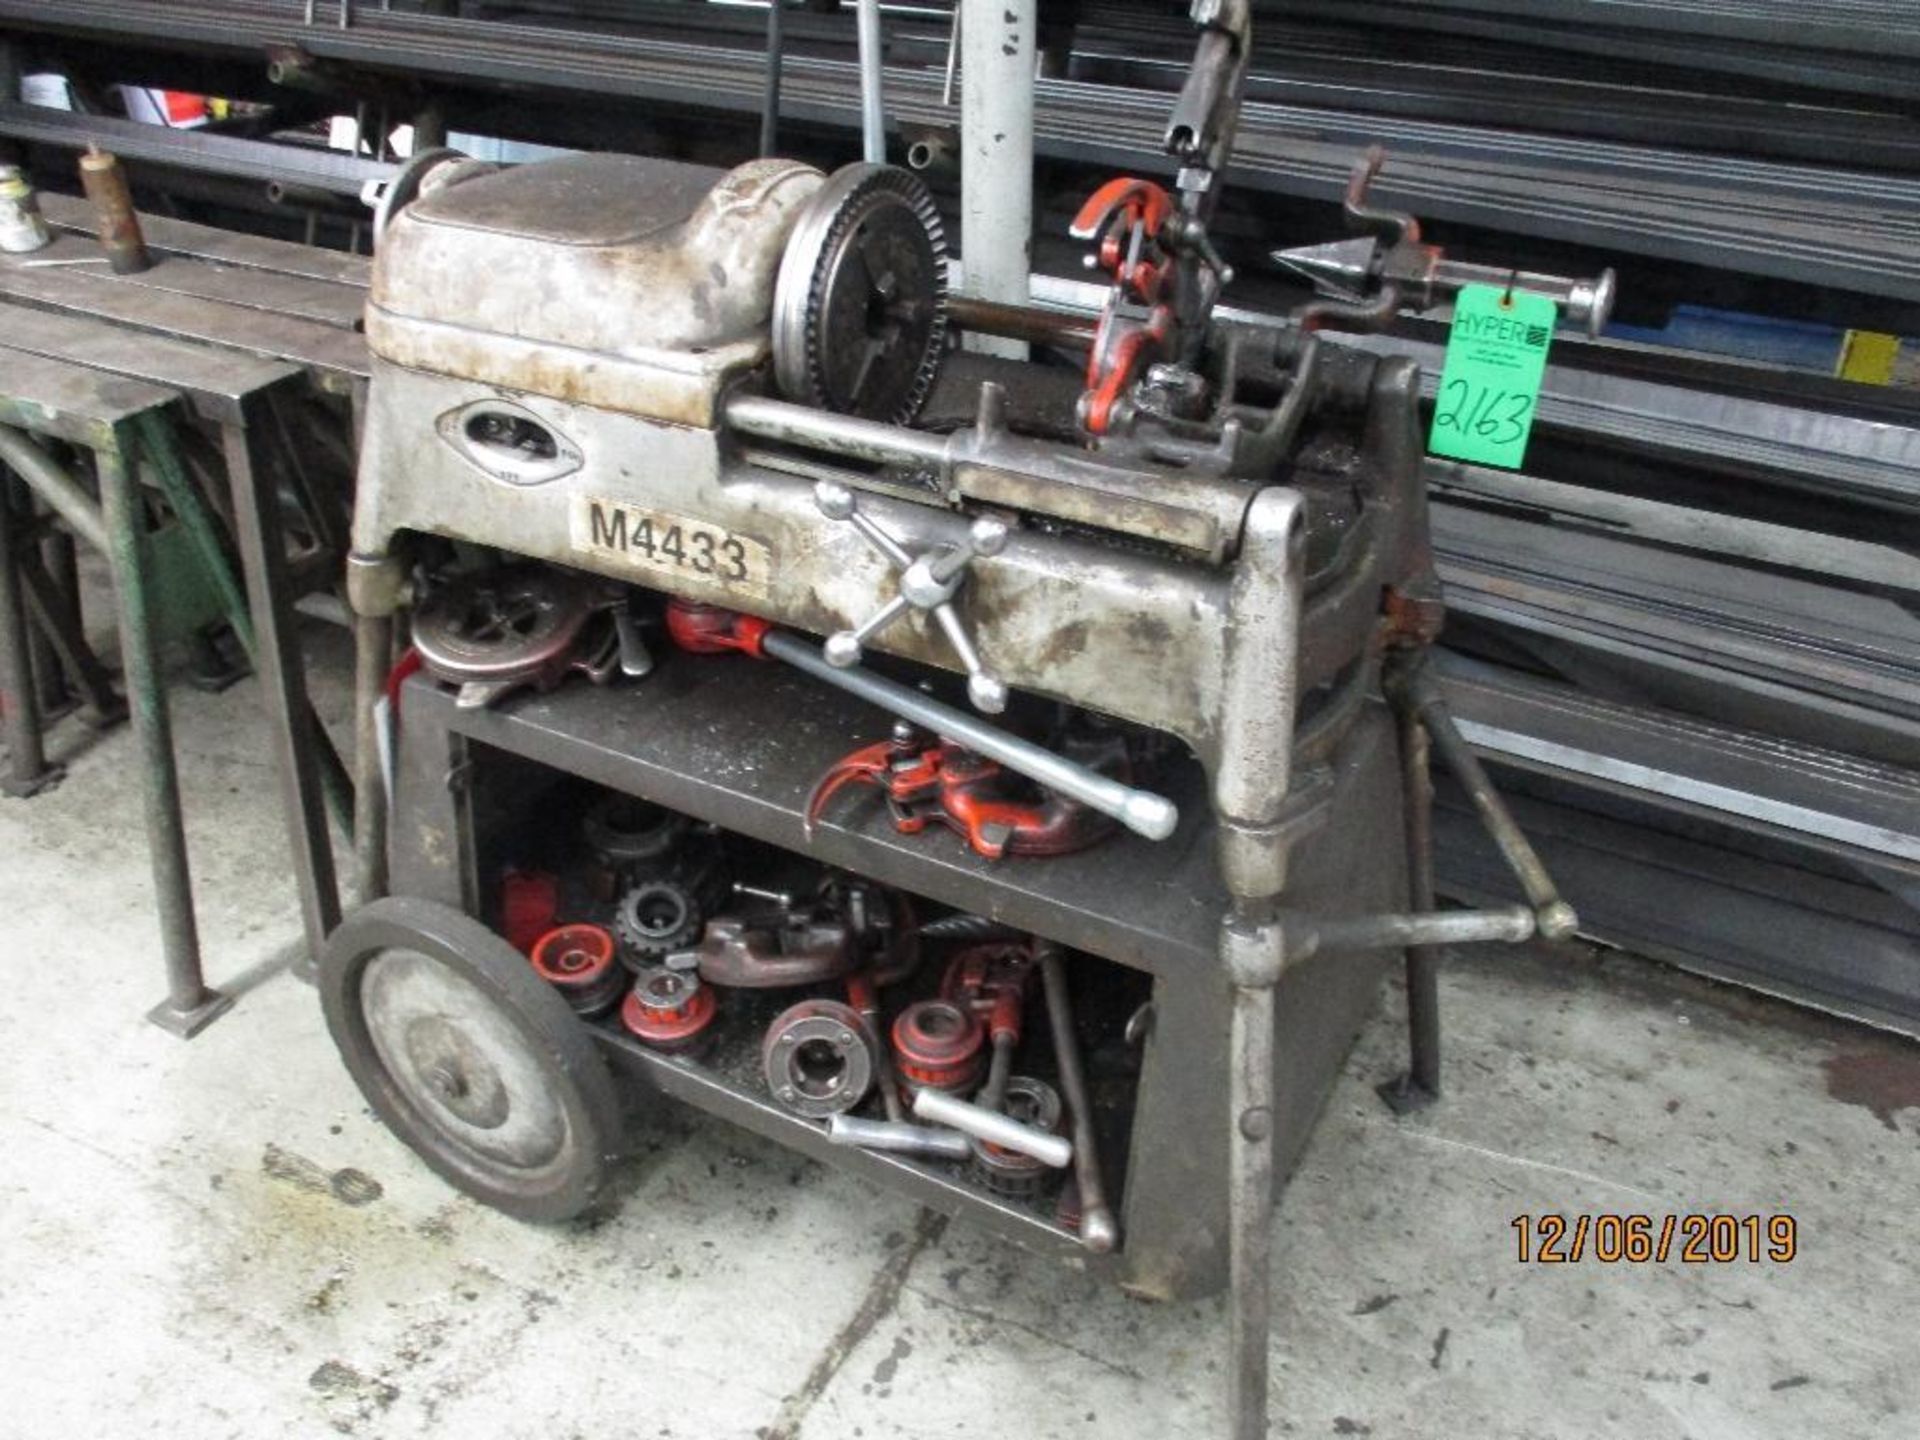 Ridged Pipe Threading Cart, 1/8" To 2" Pipe Capacity, 1/4" To 2" Bolt Capacity S/N 345457